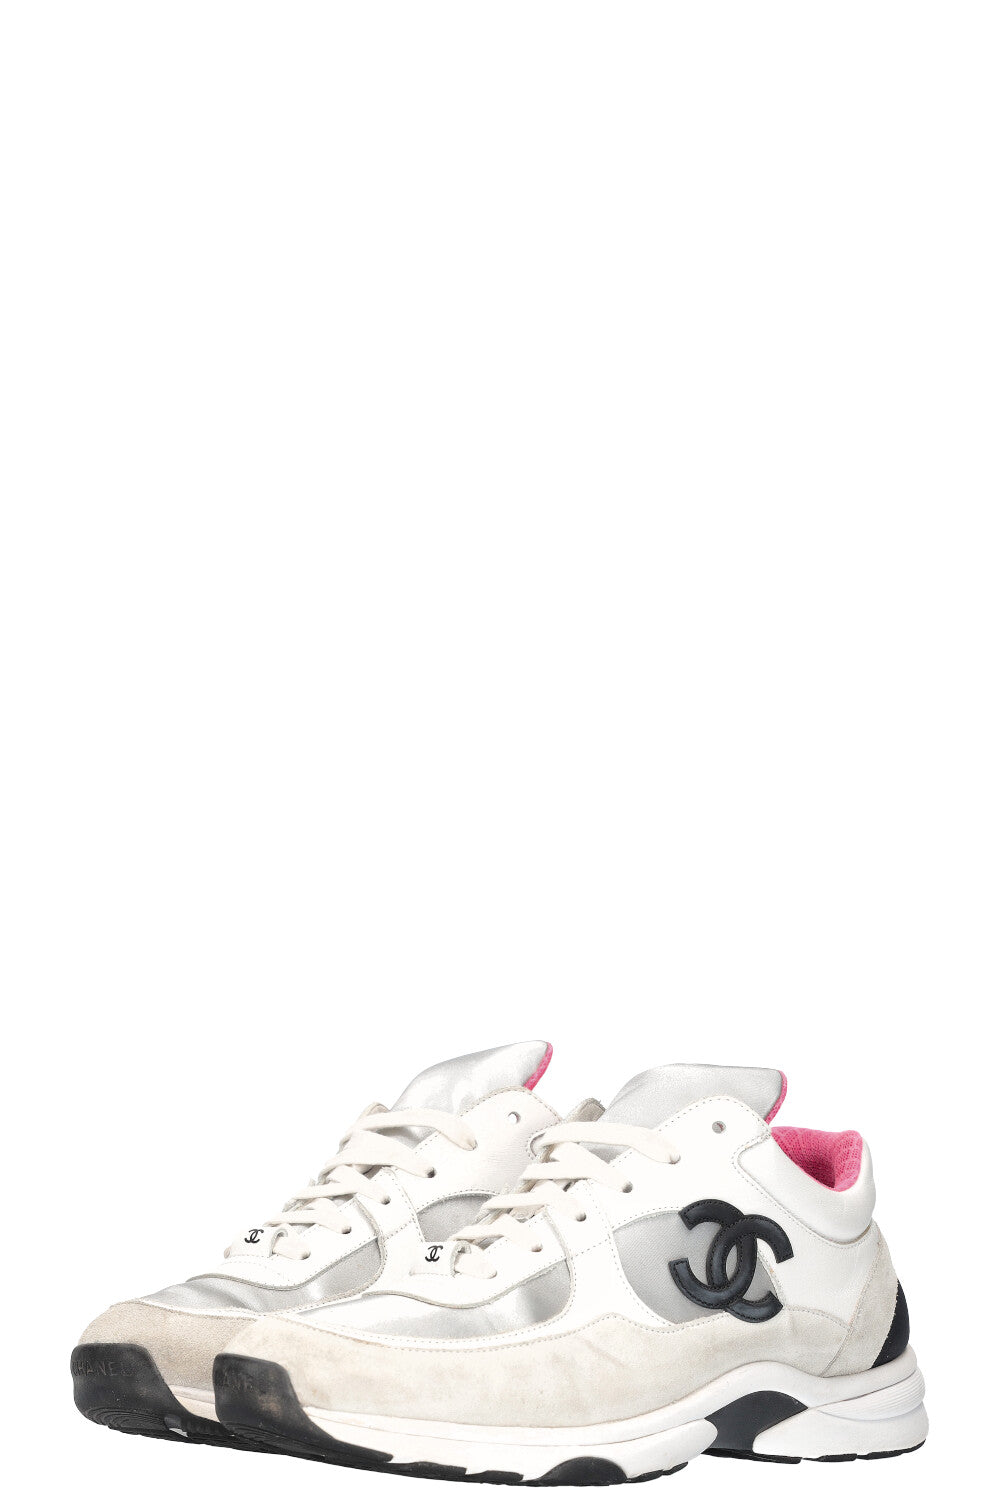 CHANEL Sneakers White Silver Neon Pink